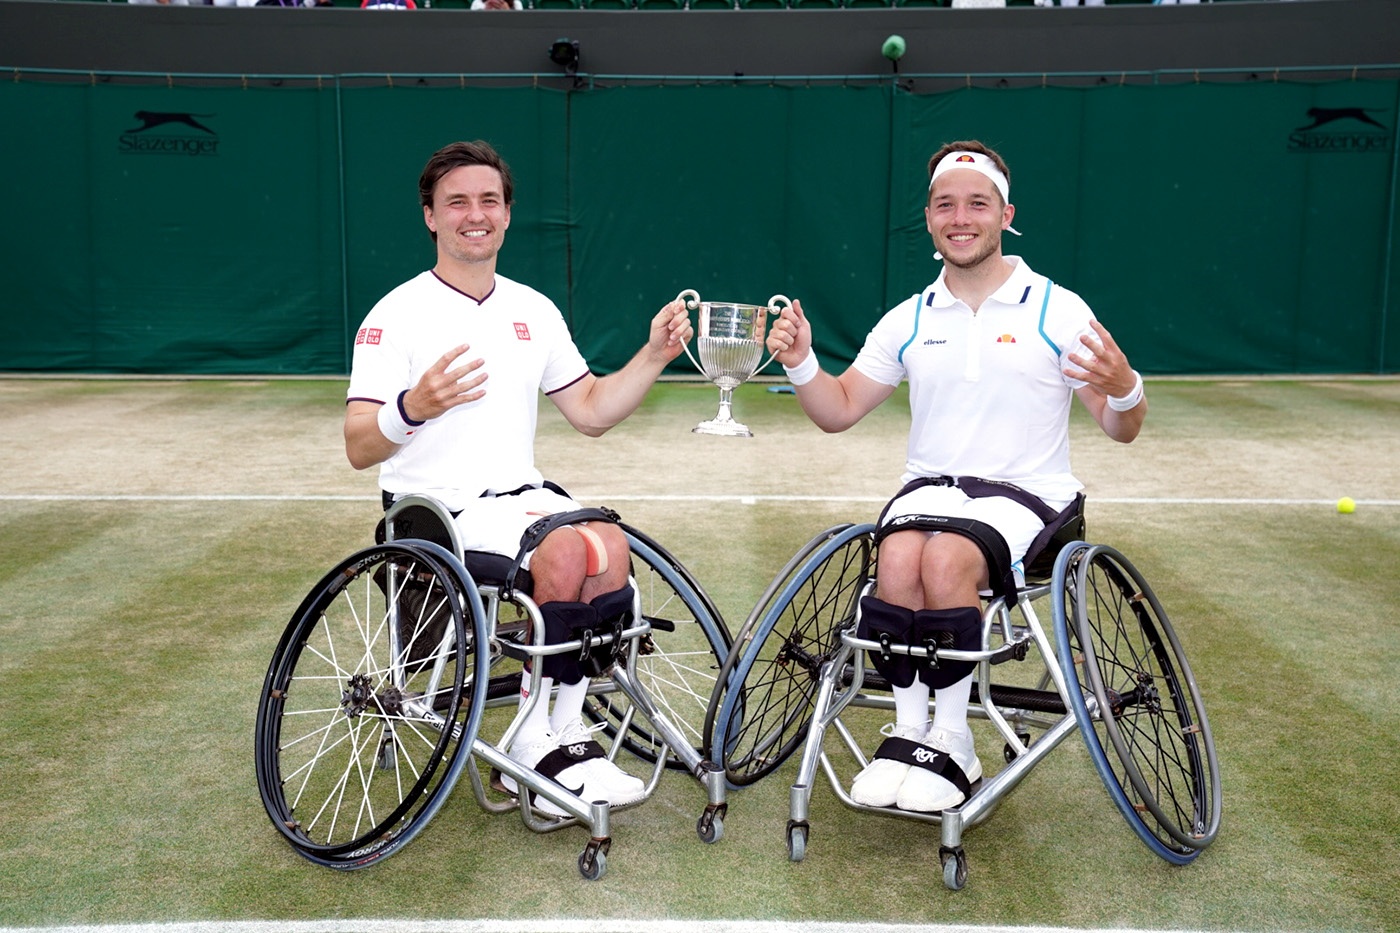 Dylan Alcott Wins Quad Wheelchair Singles The Championships Wimbledon 2021 Official Site Ibm